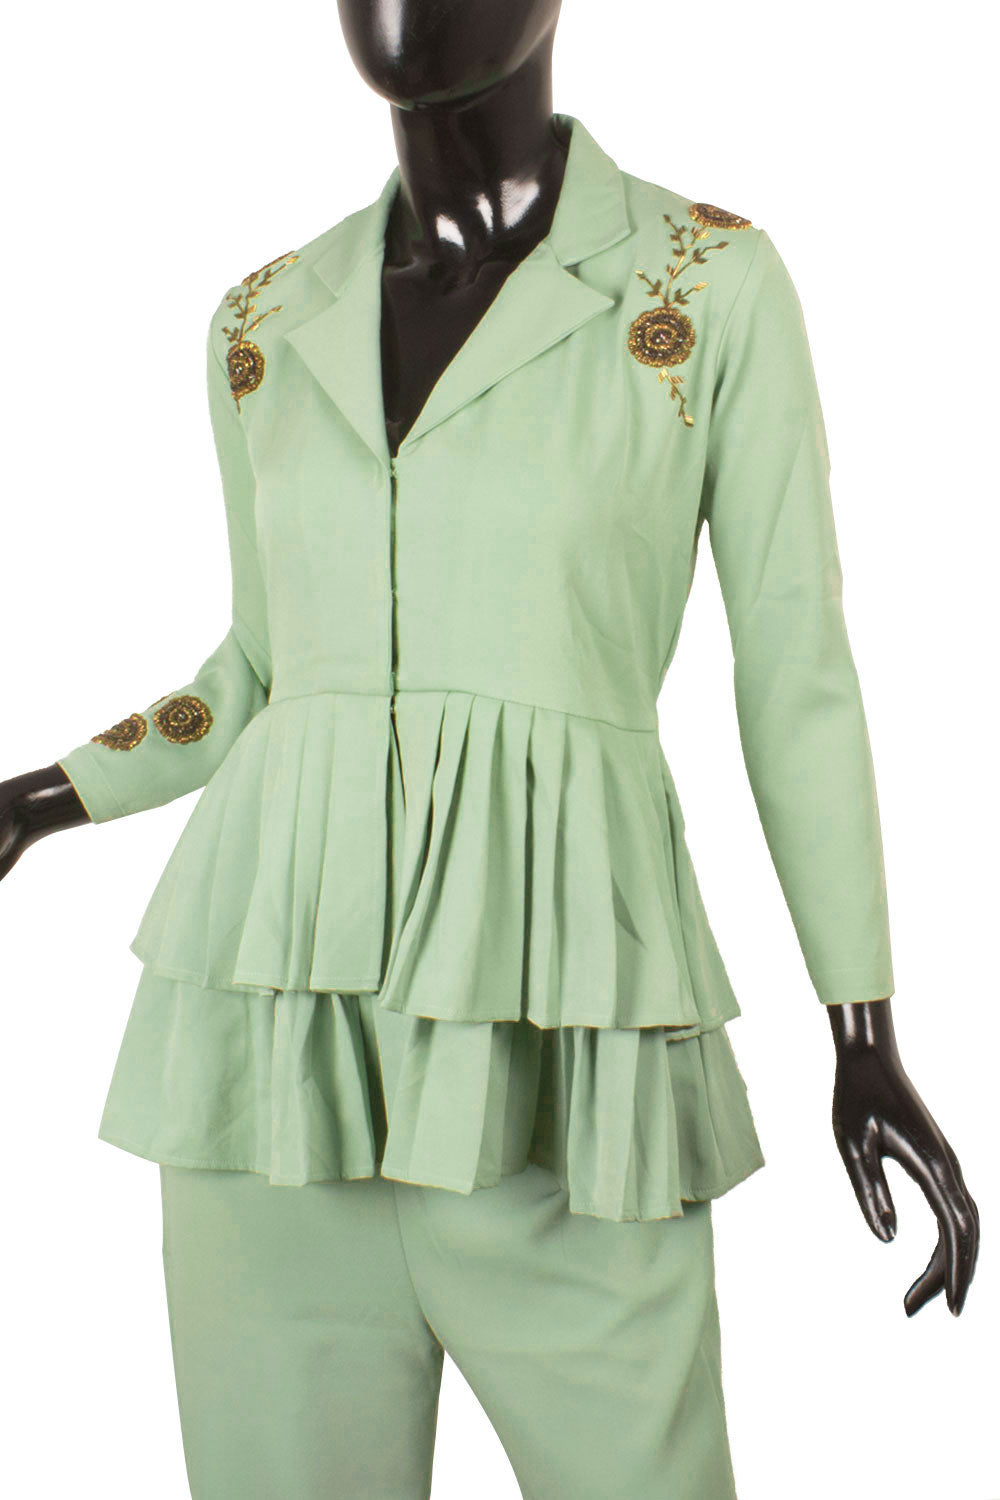 Handcrafted Viscose Cotton Coordinated Set with Embellished Shoulder and Peplum Top